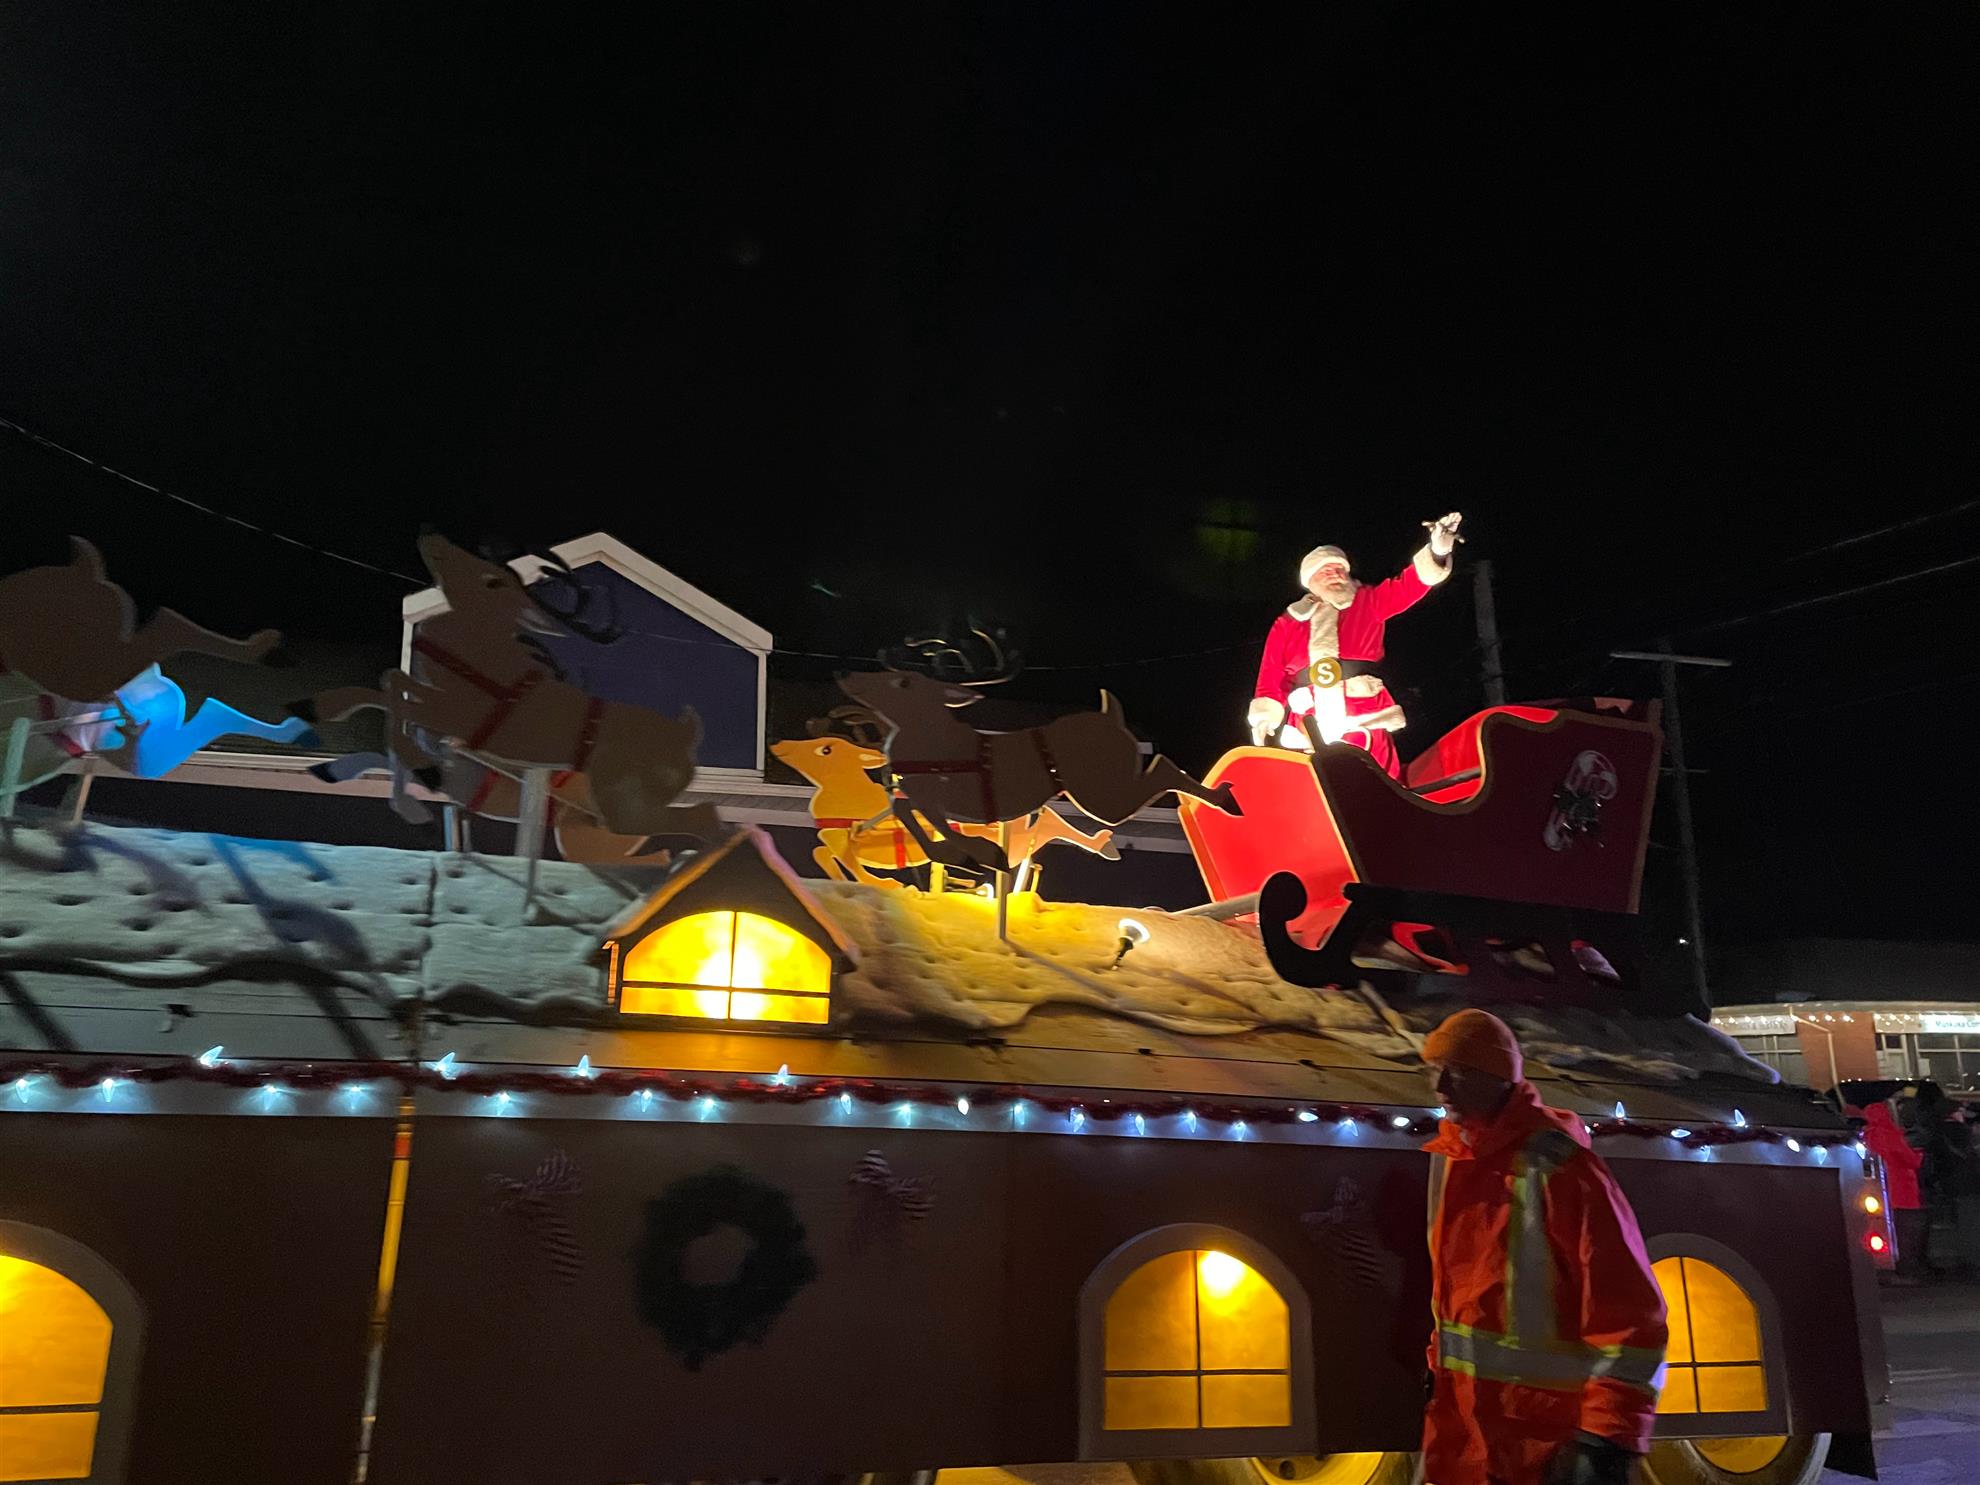 Santa Claus waving to the crowd from a parade float